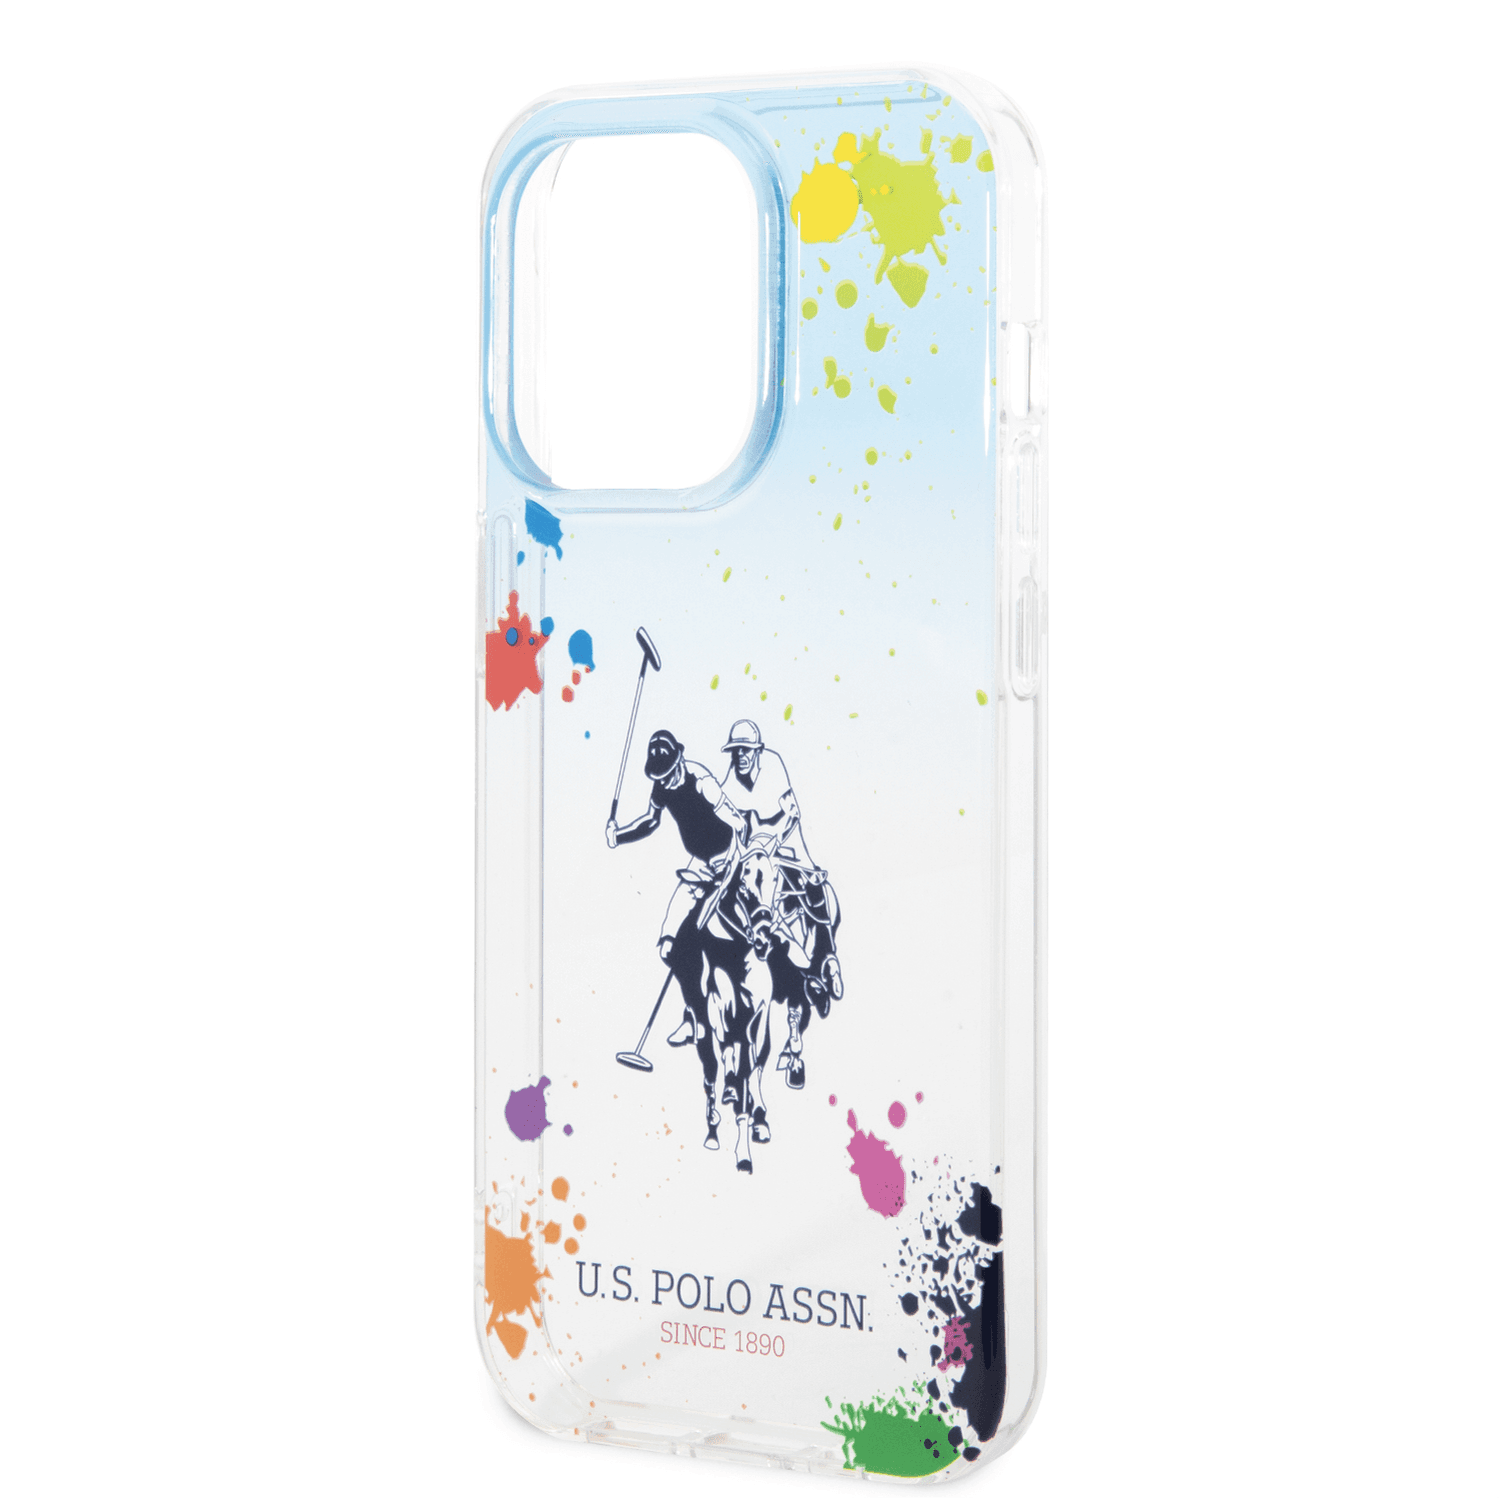 U.S.Polo Assn. USPA PC/TPU Gradient Case With Splattered Pattern & Horse Logo For iPhone 14 Pro Max - Blue [ USHCP14XUARTB ]